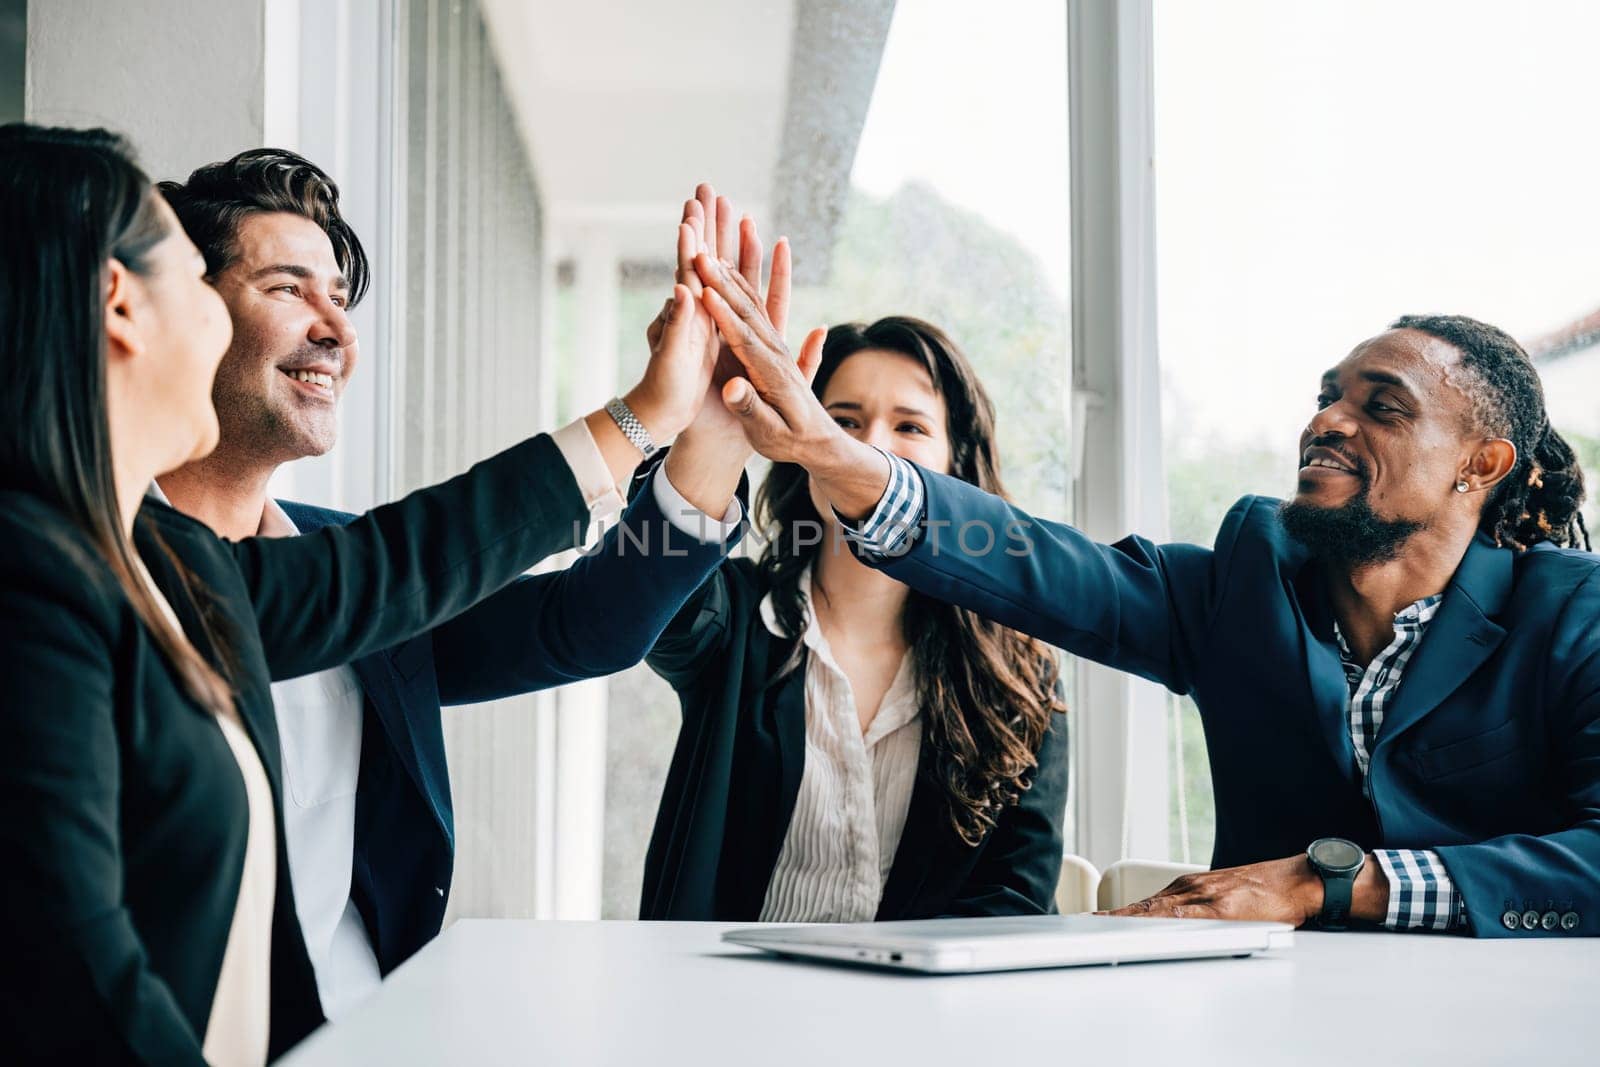 In a corporate setting, an enthusiastic group of business people high-fives during an important meeting, embodying the essence of teamwork and the fulfillment of strategic goals. by Sorapop